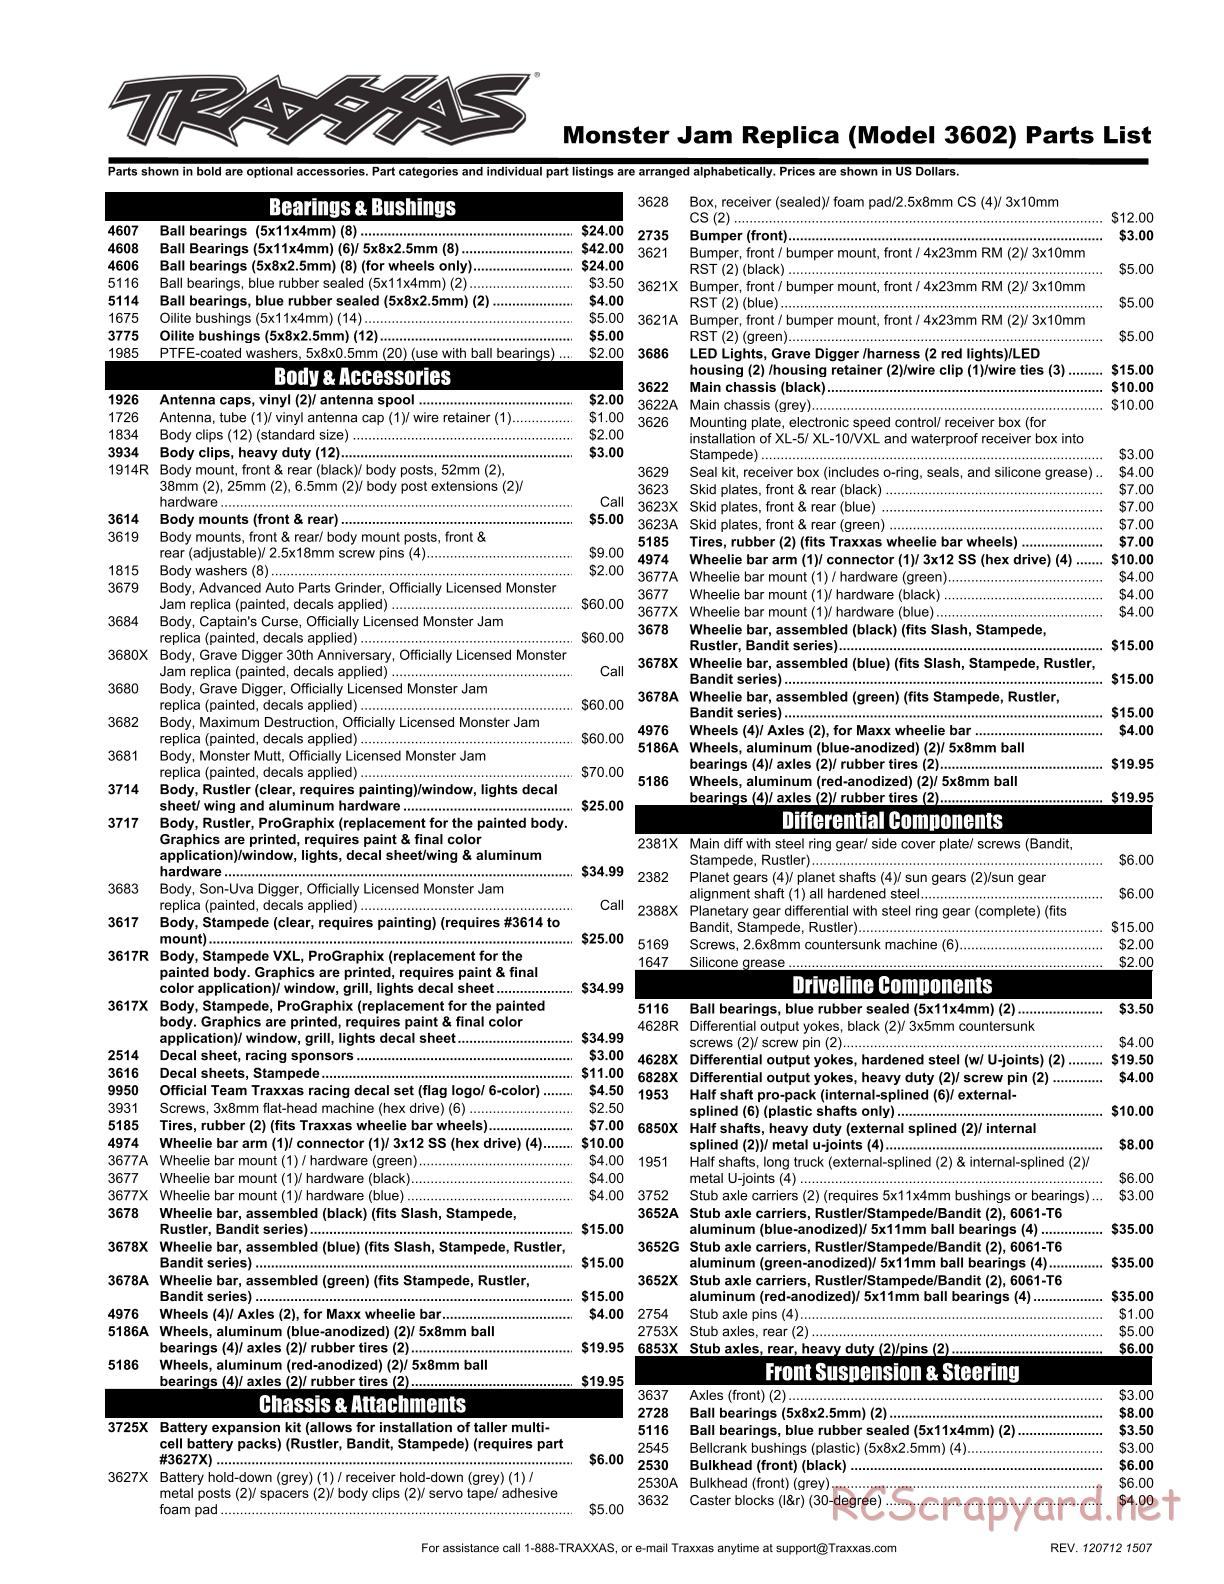 Traxxas - Monster Jam - Parts List - Page 1